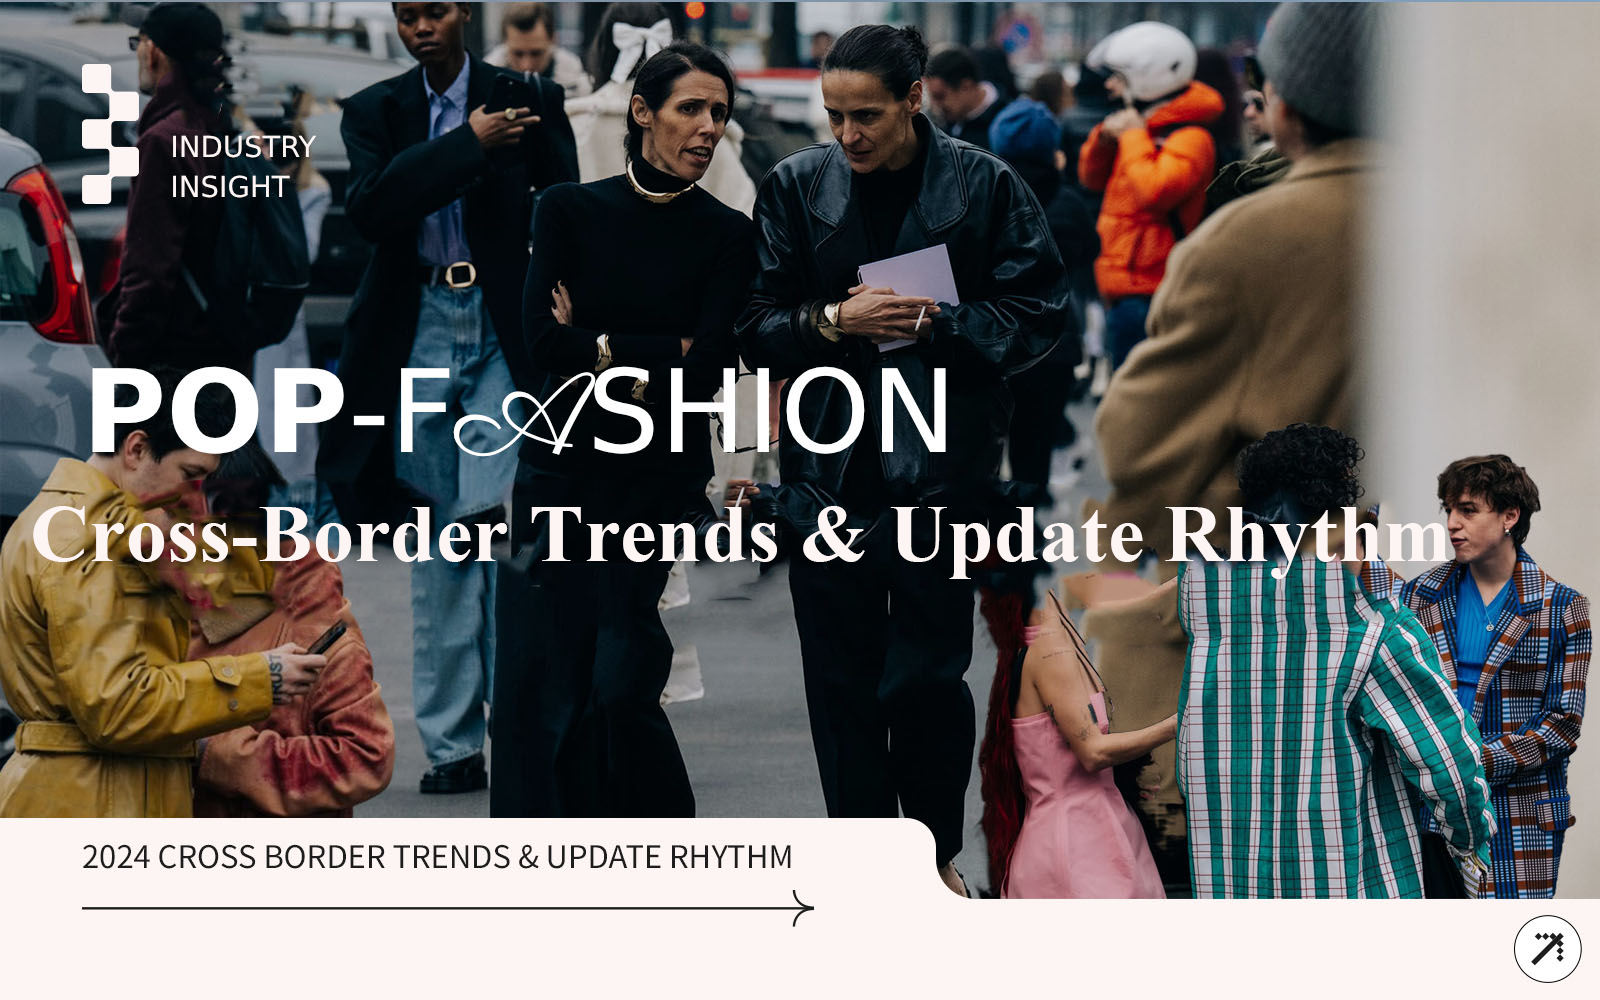 Industry Insights -- Fashion Trends & Update Rhythm in Western Countries